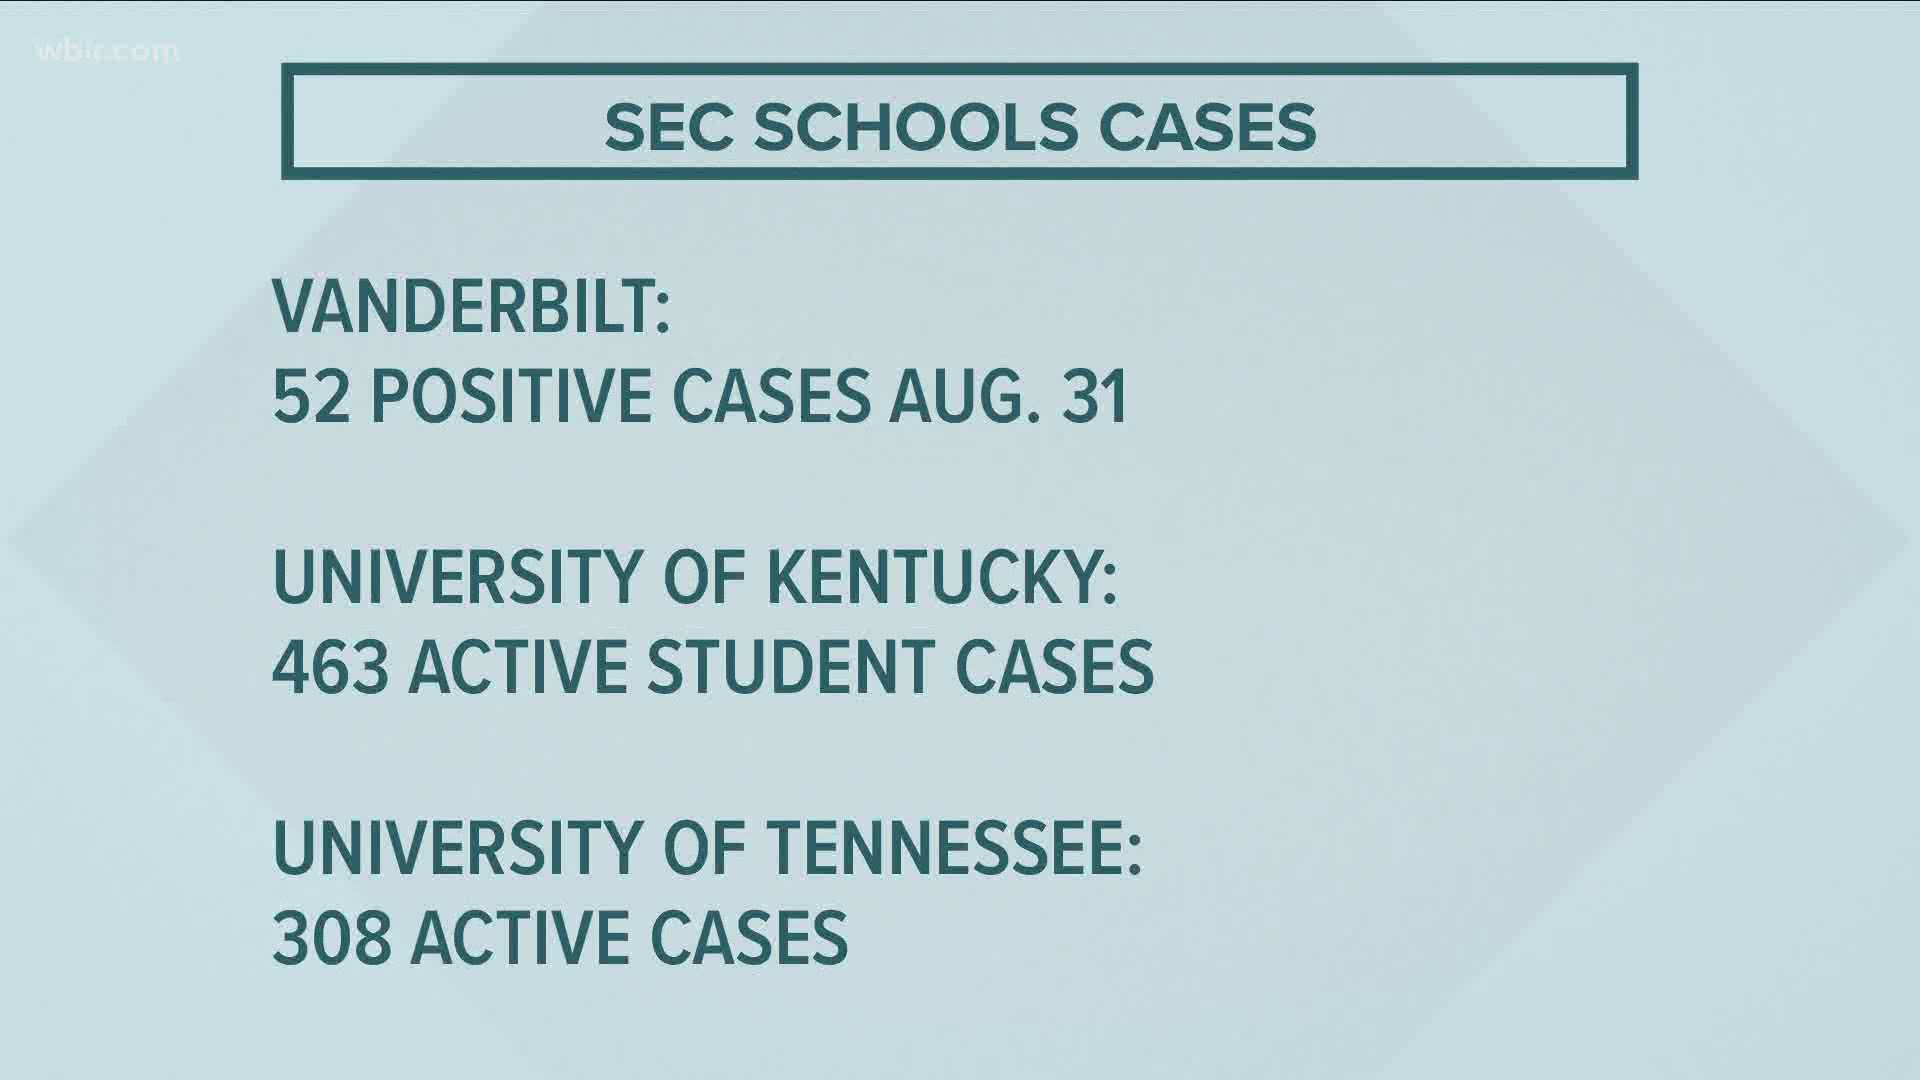 A look at how the University of Tennessee compares to its SEC peers on COVID-19 counts.